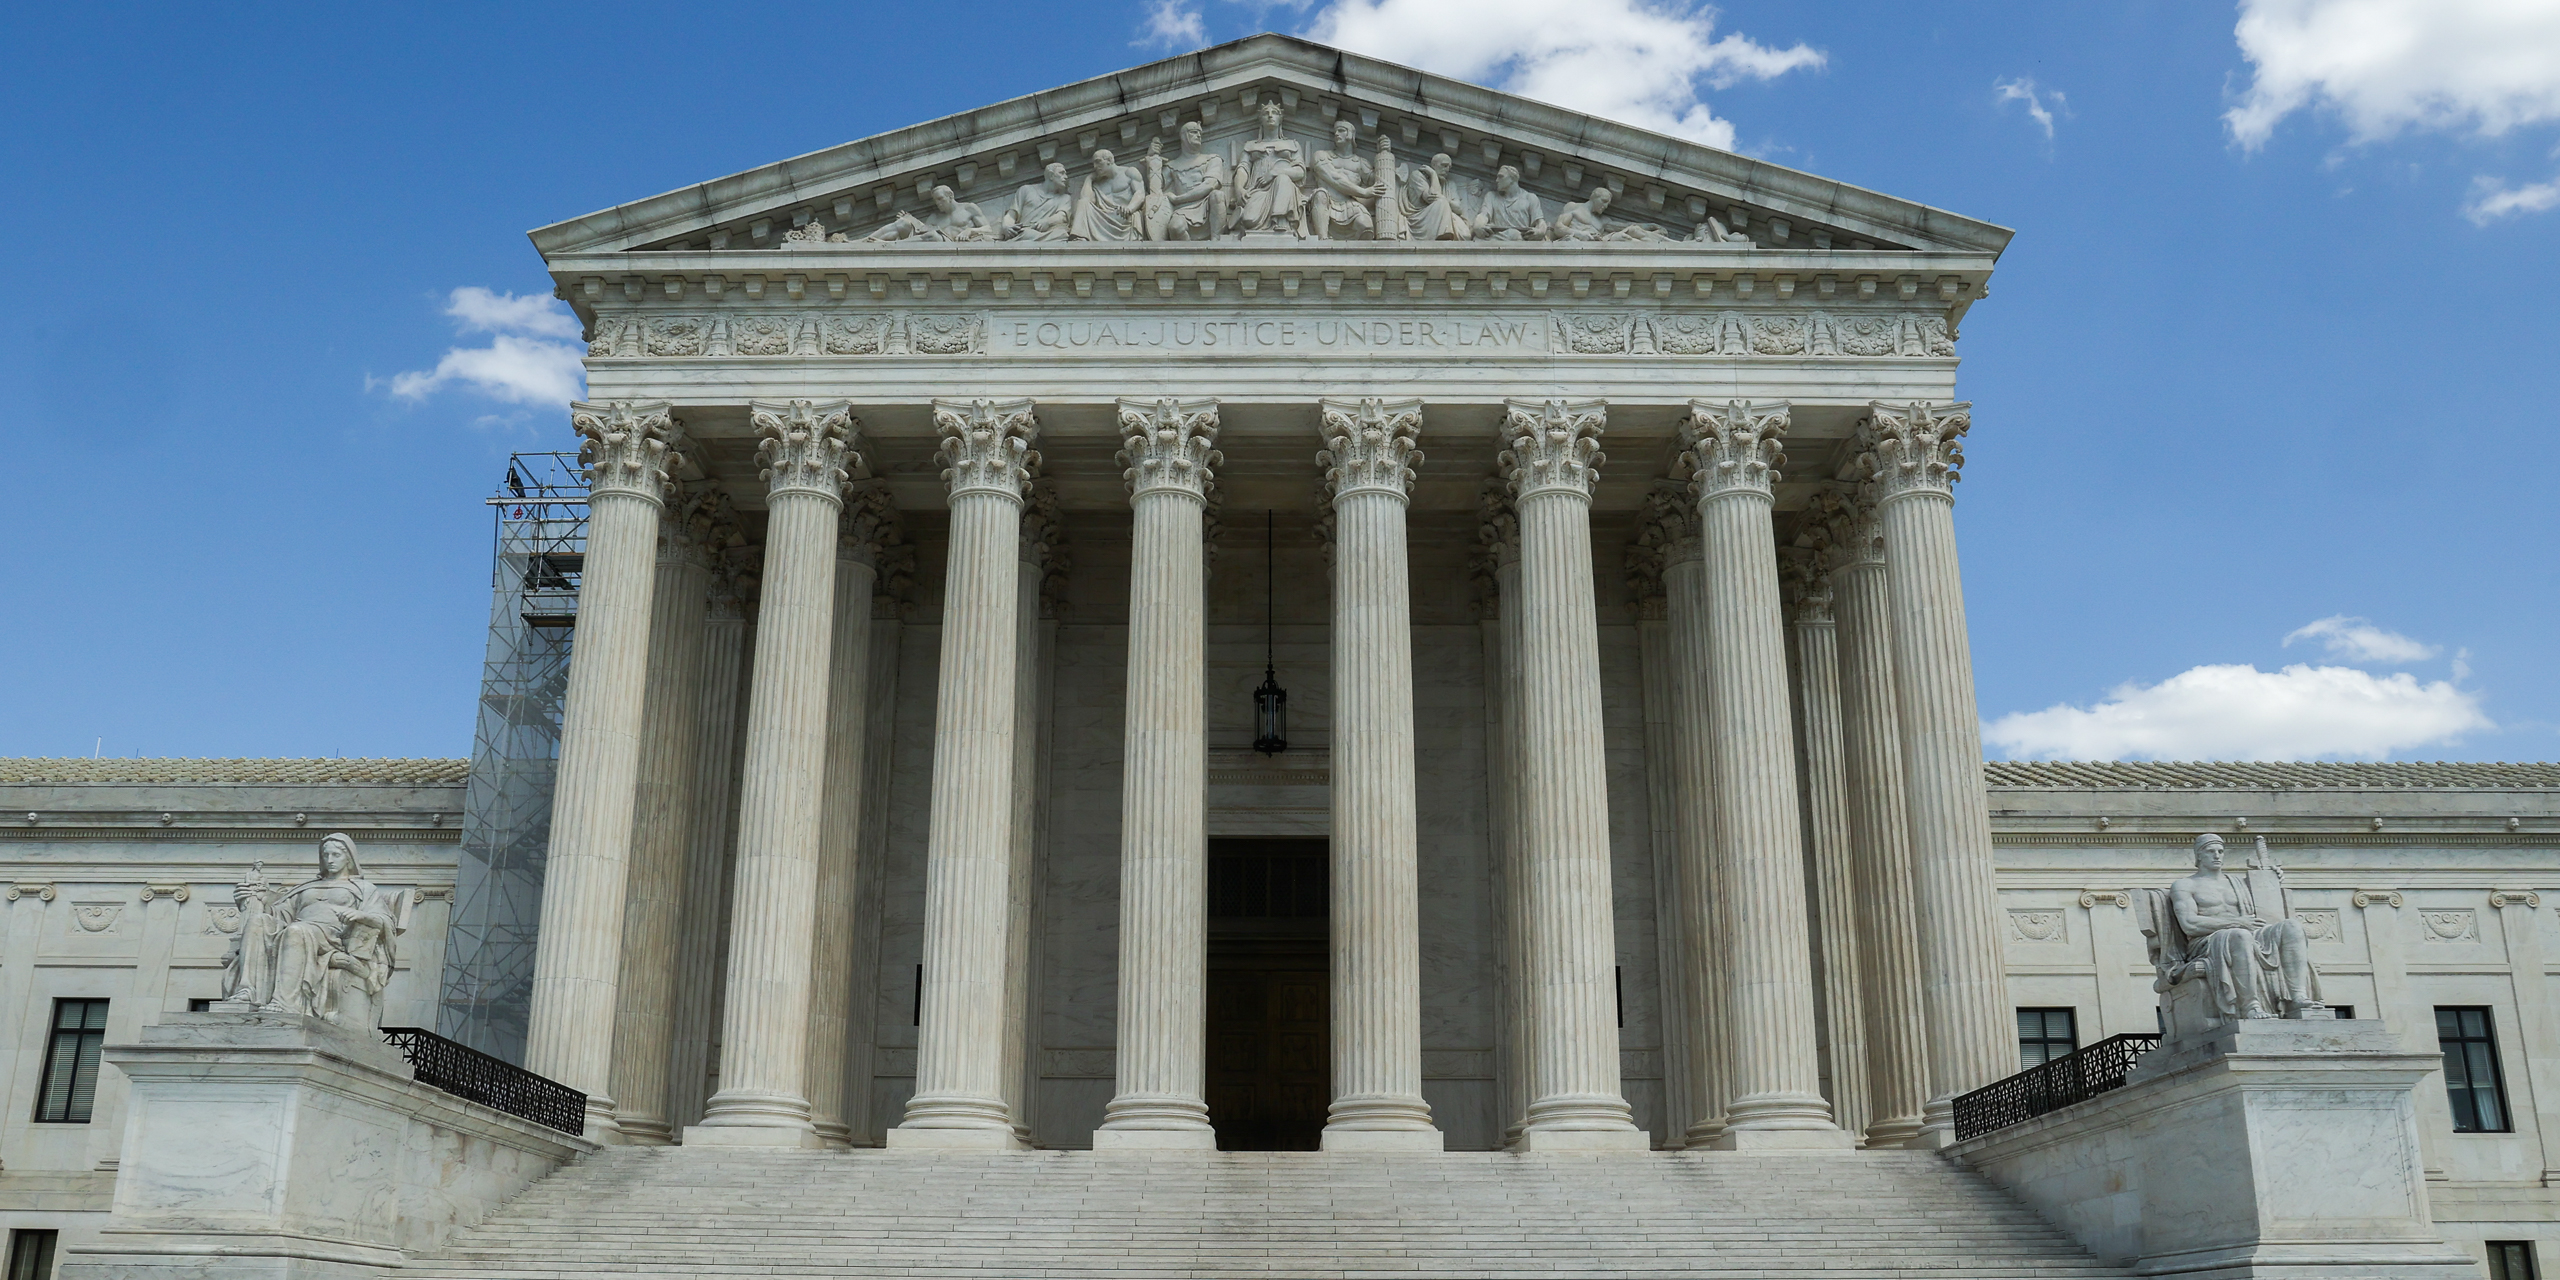 The United States Supreme Court building also known as The Marble Palace in Washington, DC.